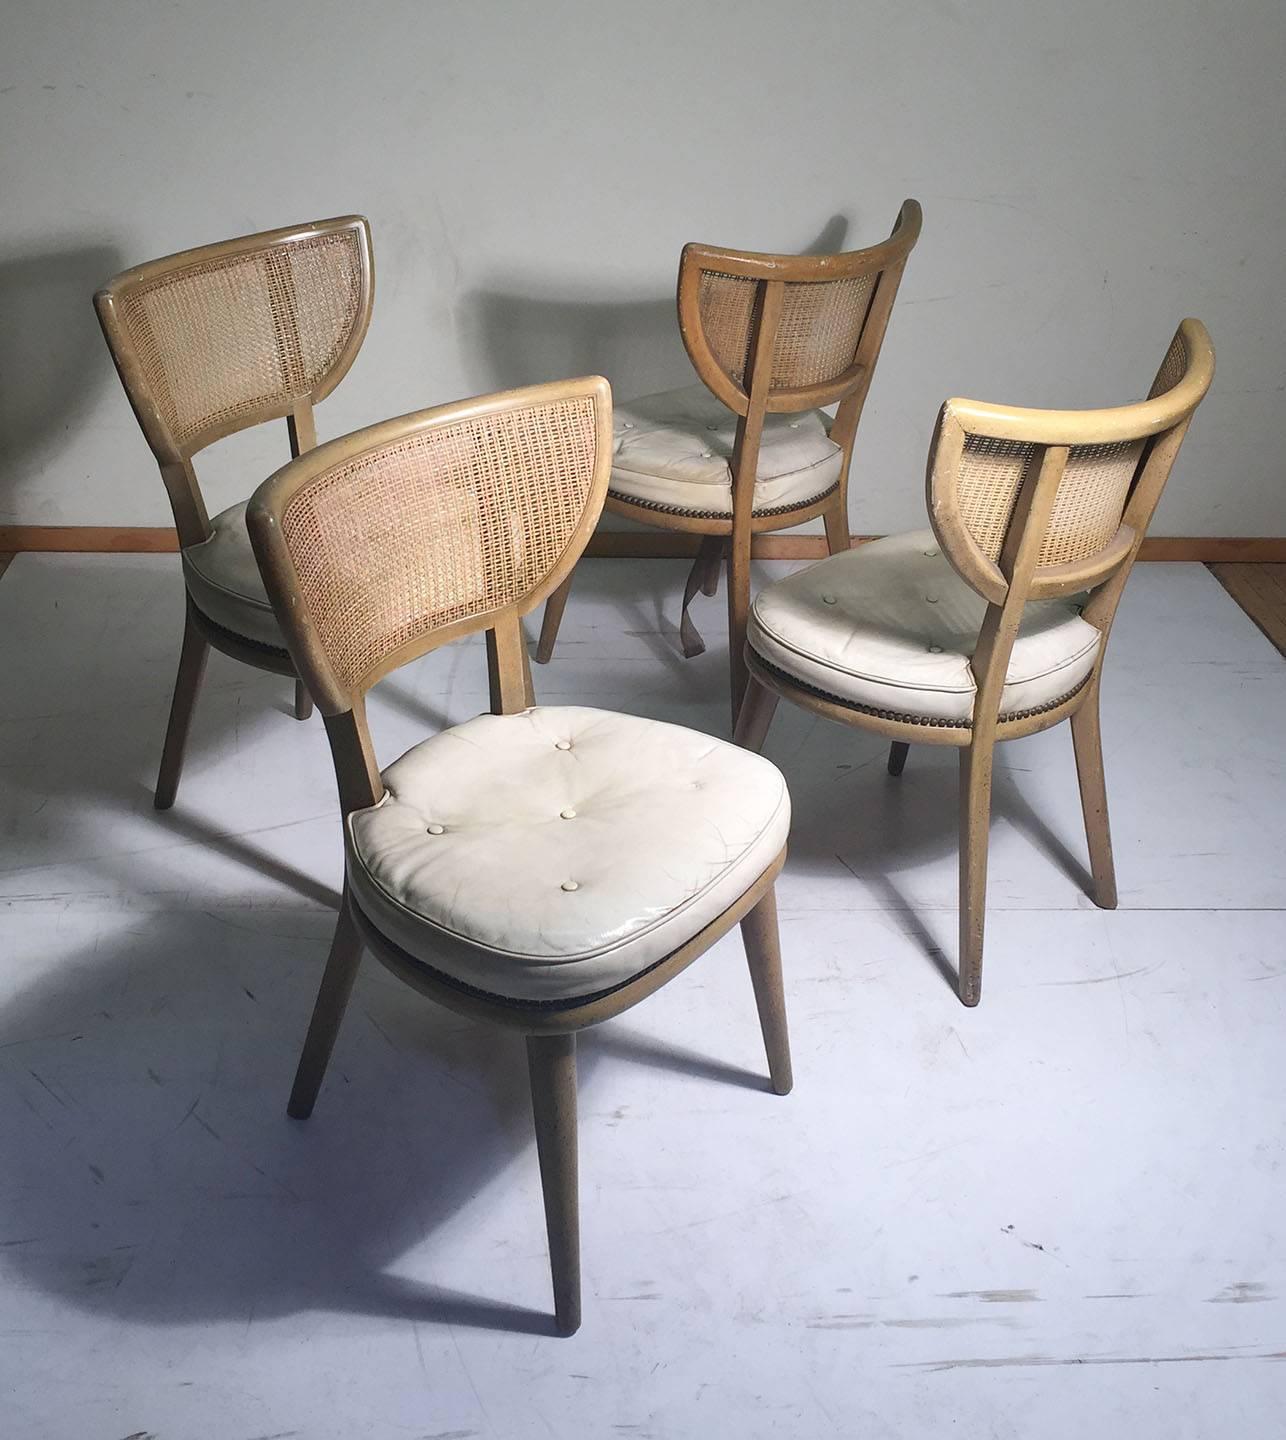 Vintage set of four American Mid-Century Modern chairs in the manner of William Haines, Paul Laszlo and Edward Wormley for Dunbar. 

These should be refurbished. The seats were done on white leather and may be of interest to preserve. Rattan is in